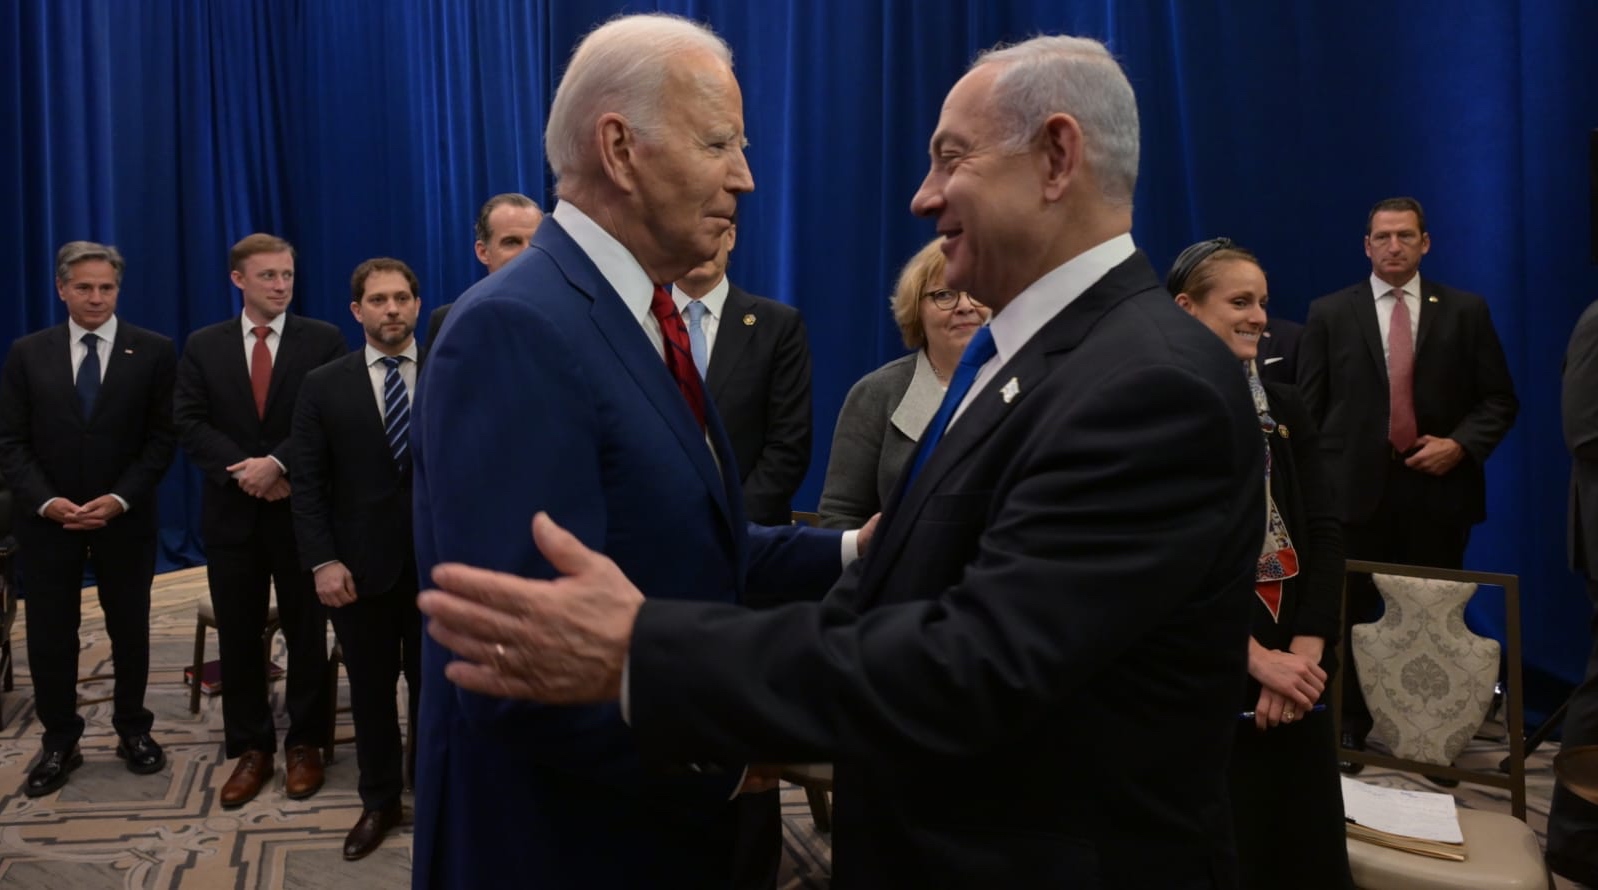 Biden and Netanyahu meet for the first time this year, signaling friendship amid disagreements